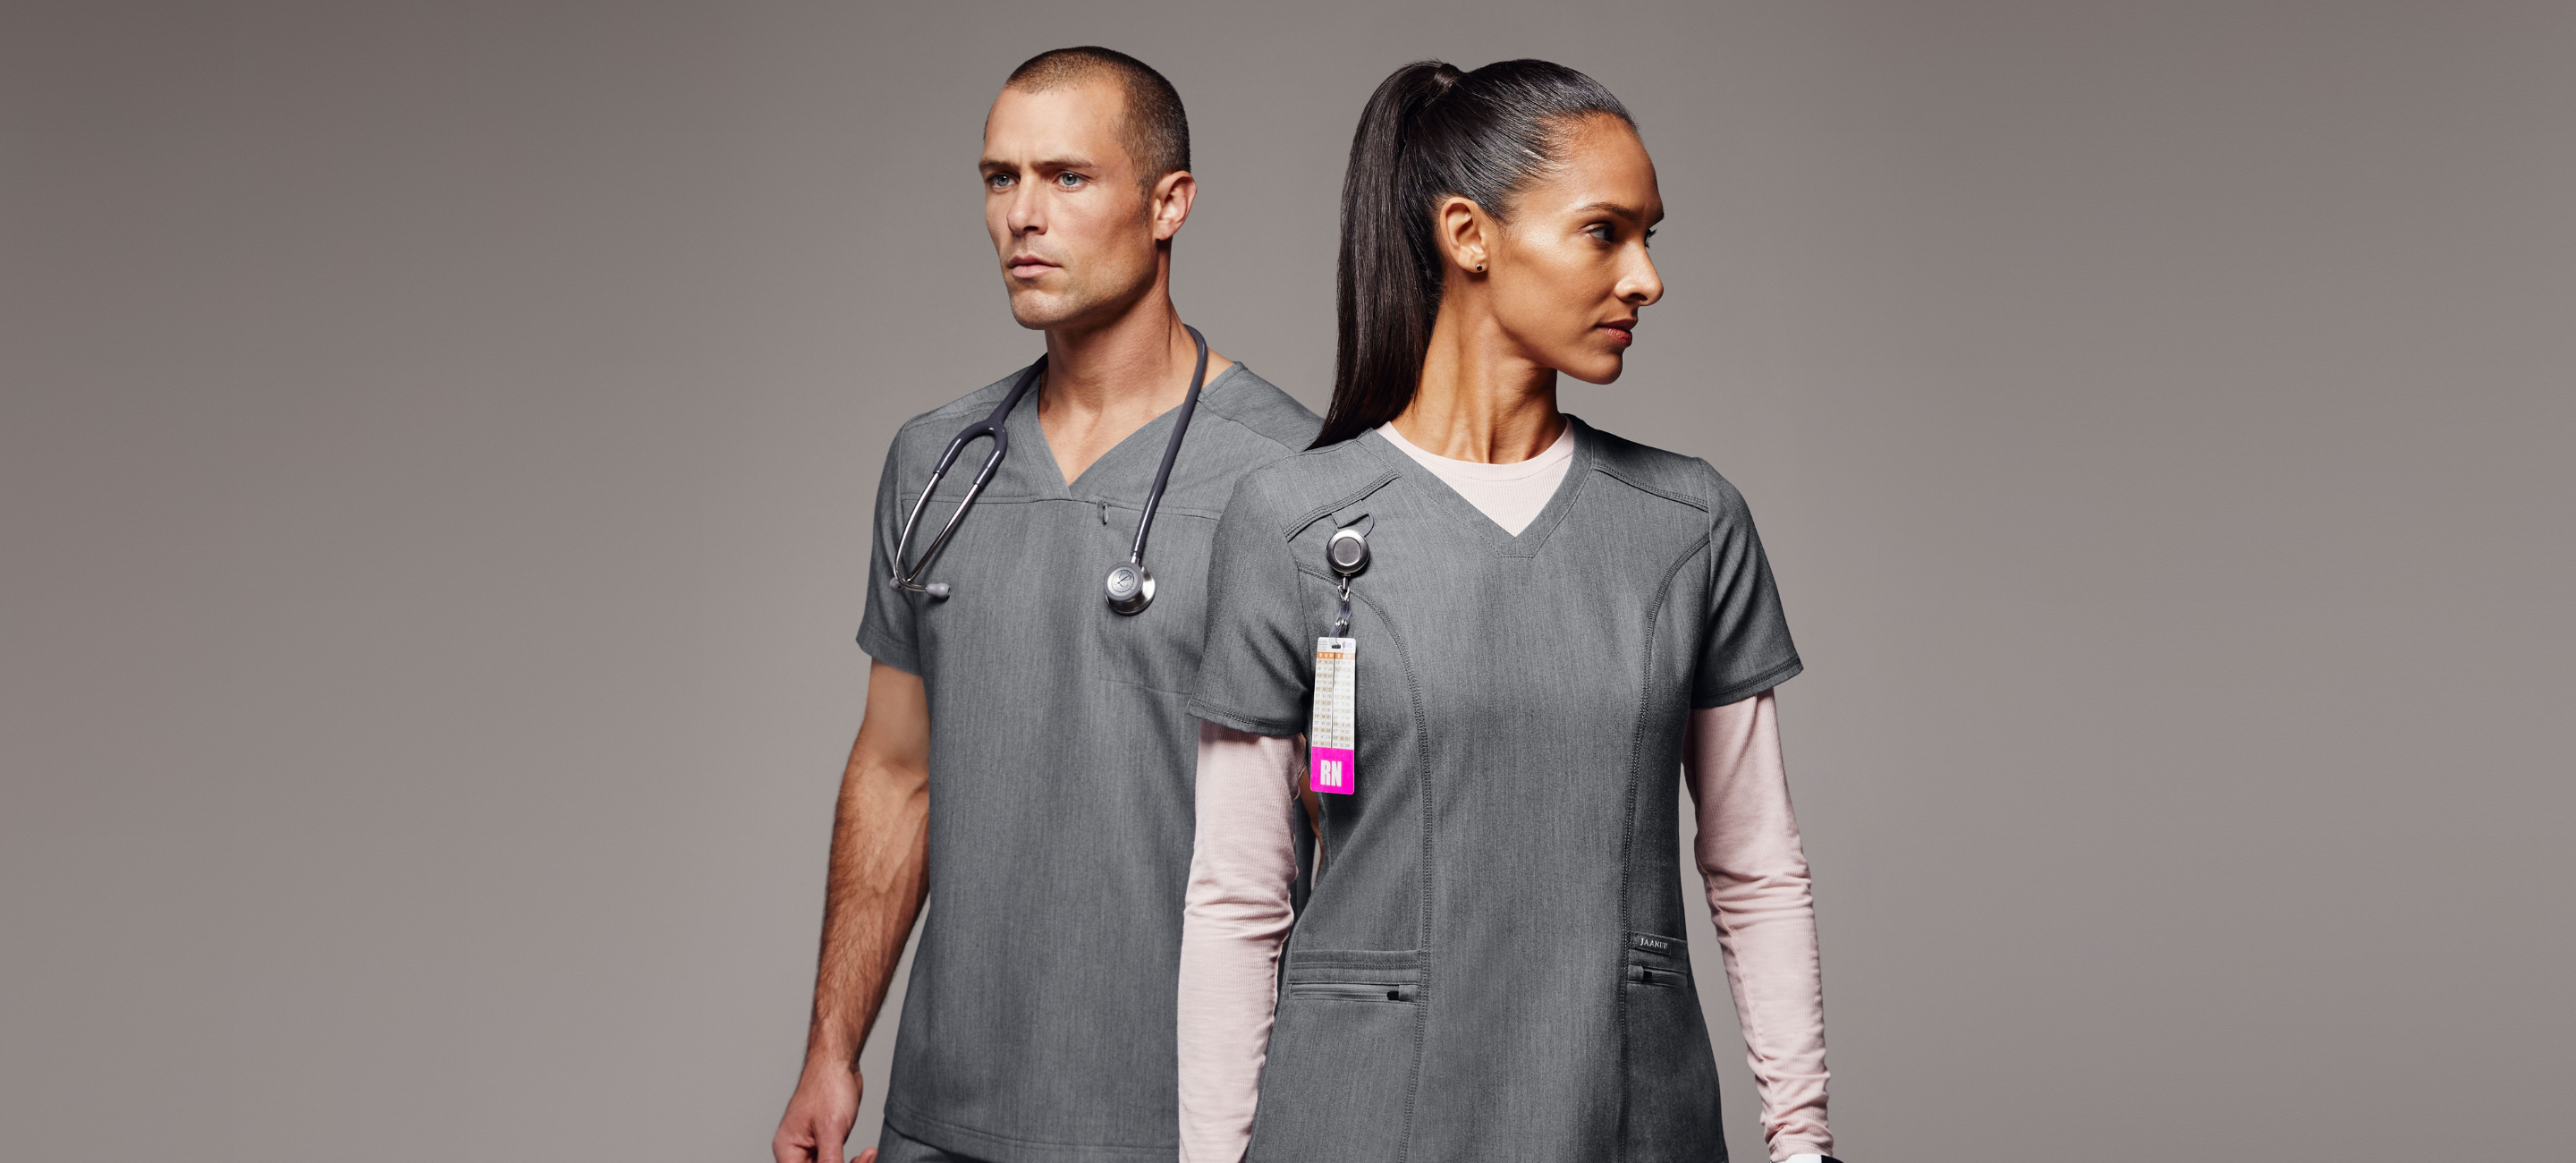 Our 6 Best Undershirts For Scrubs & Tips On How To Wear Them in Style